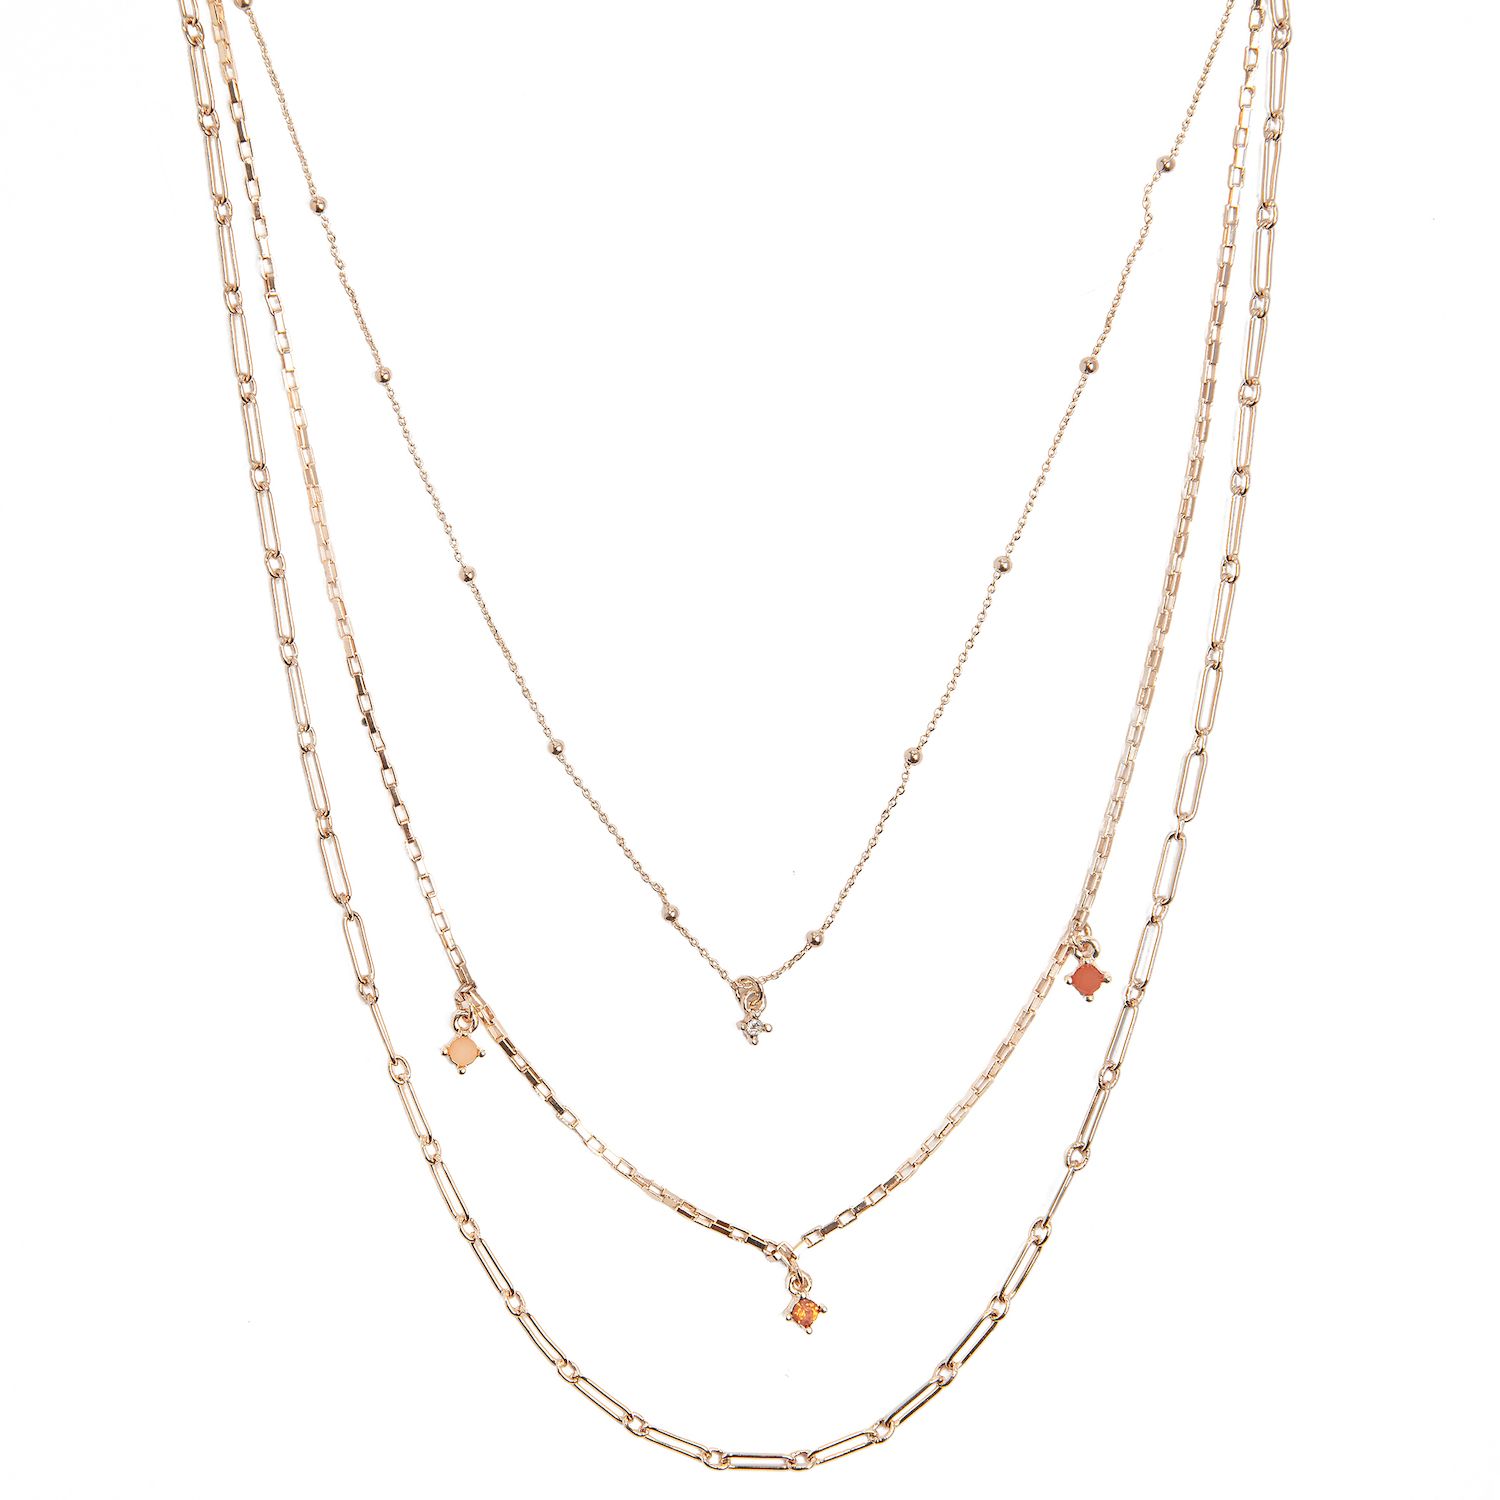 Image for LC Lauren Conrad 3-Row Multi Chains & Simulated Stones Layered Necklace at Kohl's.